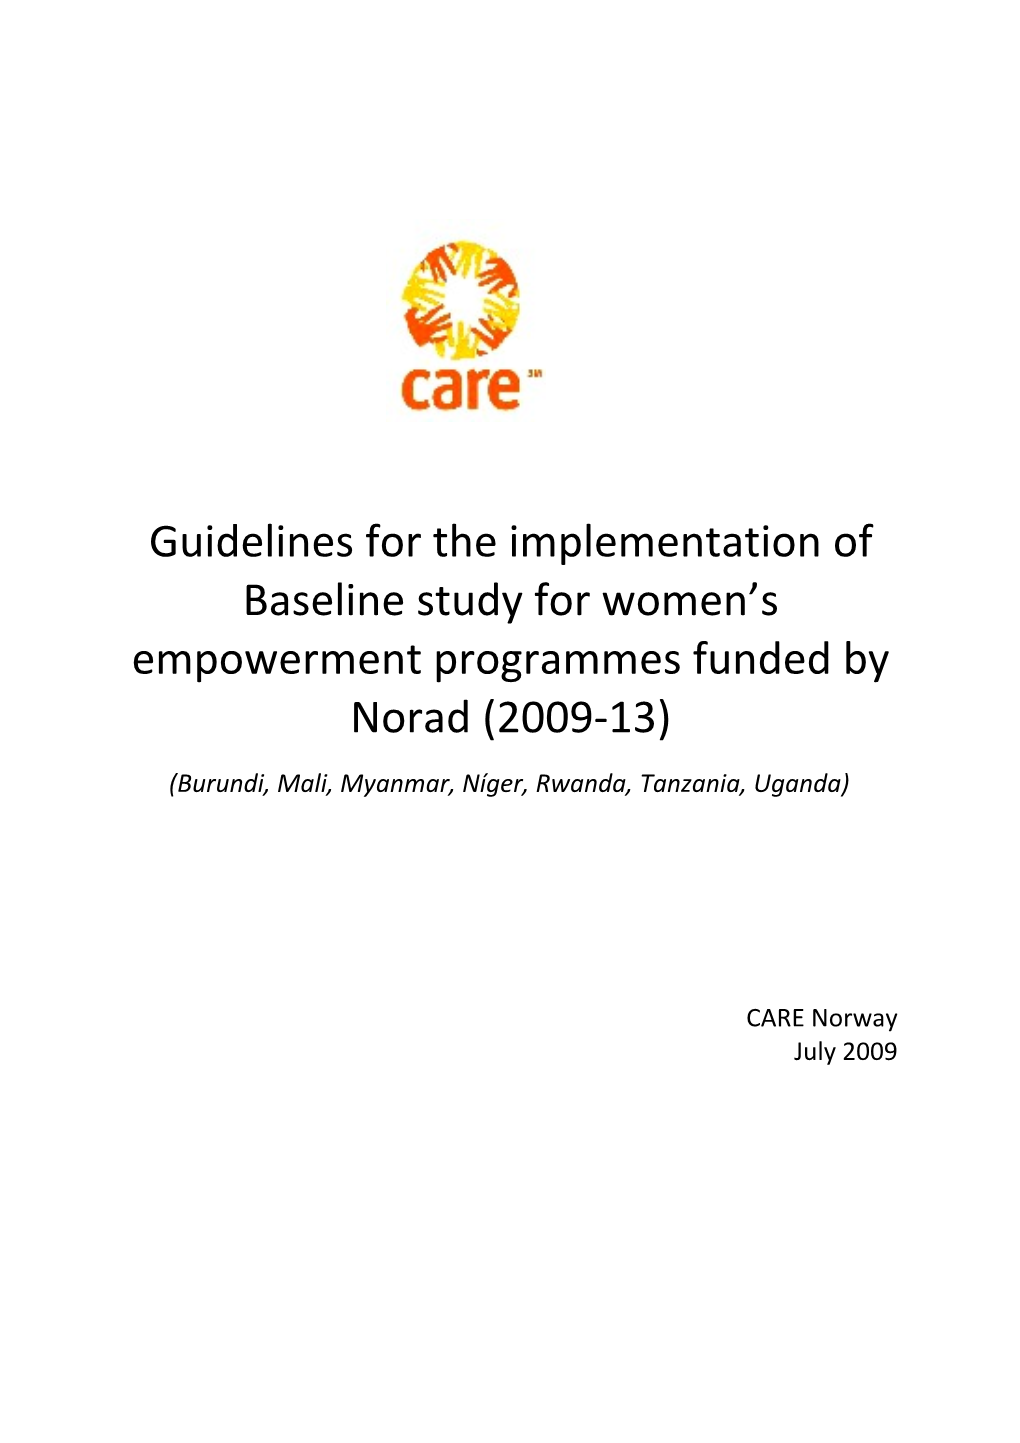 Guideline for the Implementation of Baseline Study for Norad Funded Programs